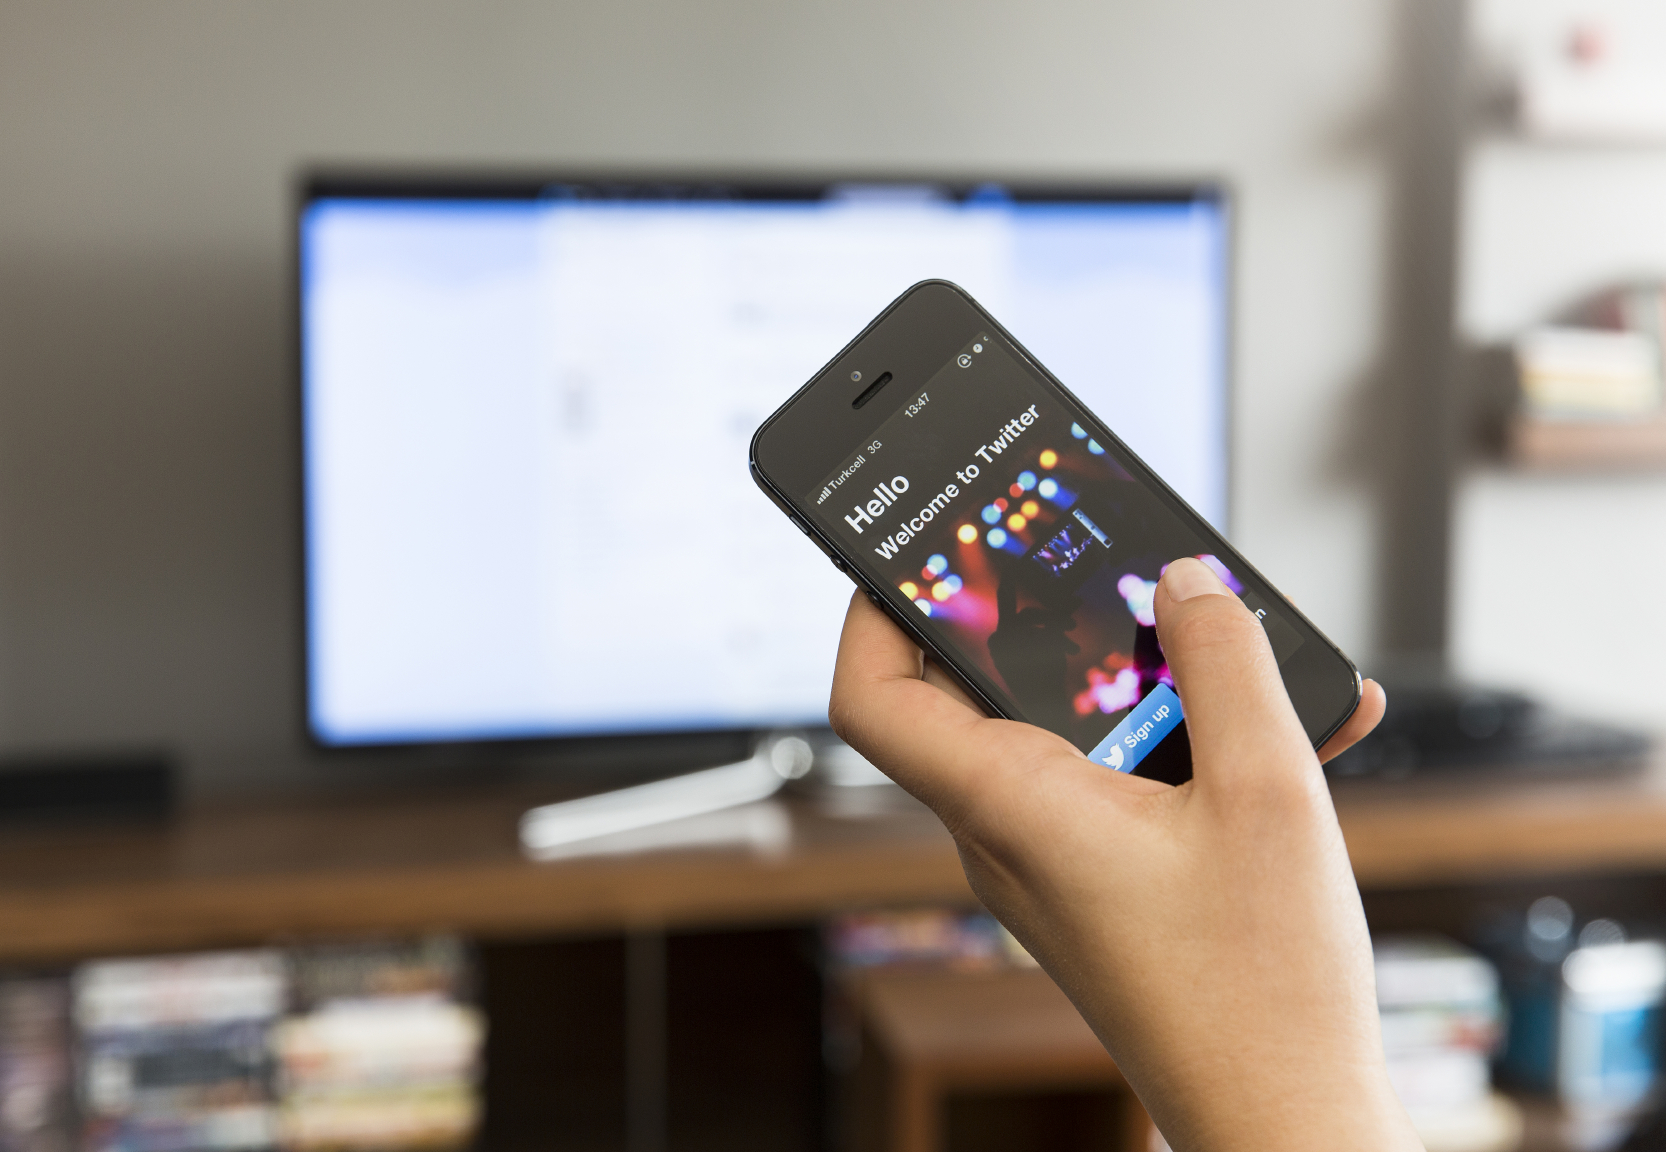 How To Quickly Connect Phone To Smart TV Without WIFI